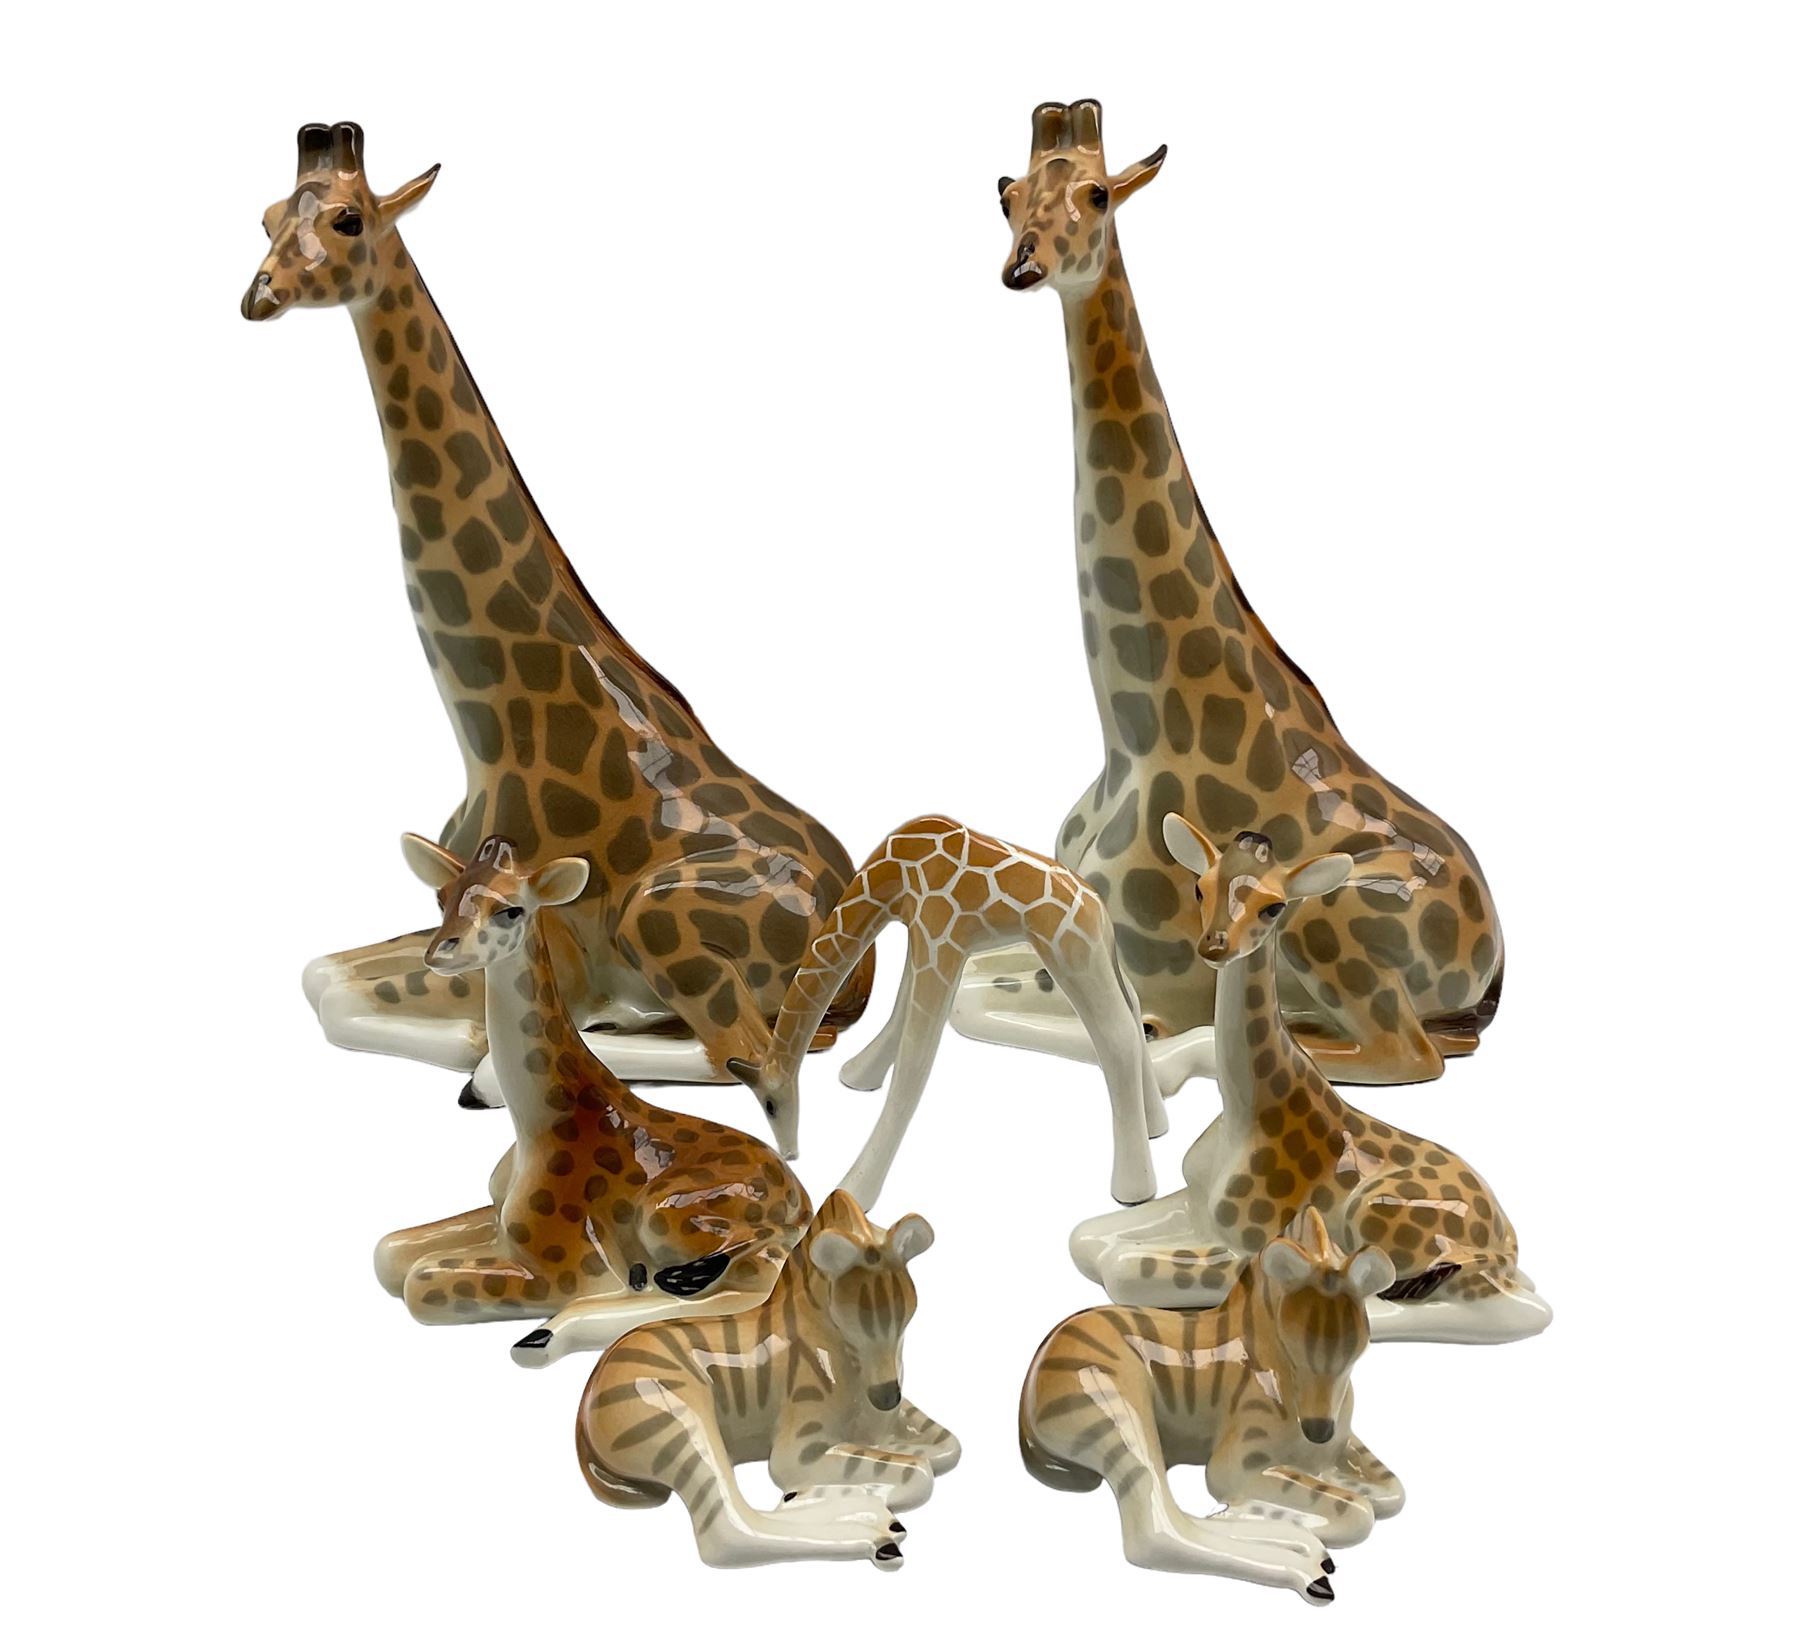 USSR Lomonosov model of resting giraffe pair together with small zebra and 4 other small models max